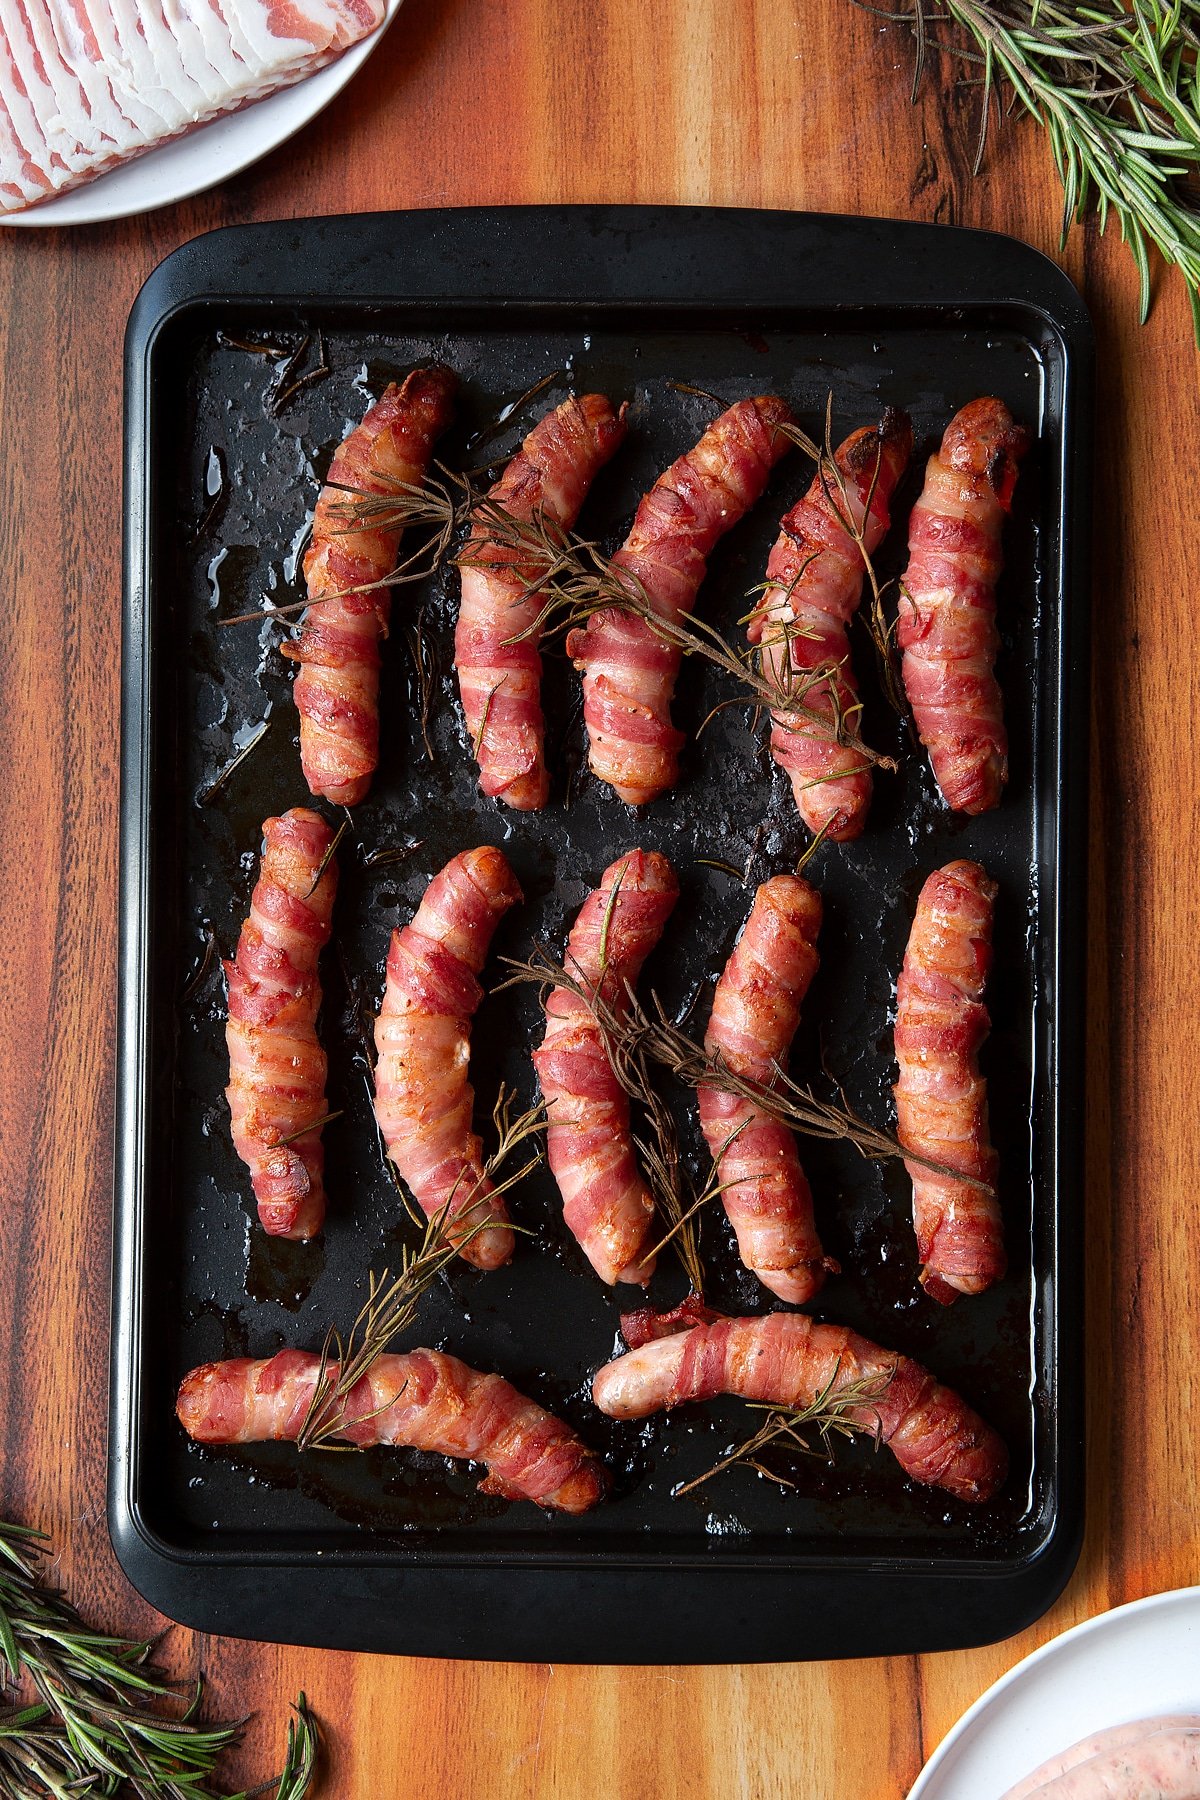 Overhead shot of bacon-wrapped cooked sausages with rosemary on top in a black tray. The bacon is crispy.